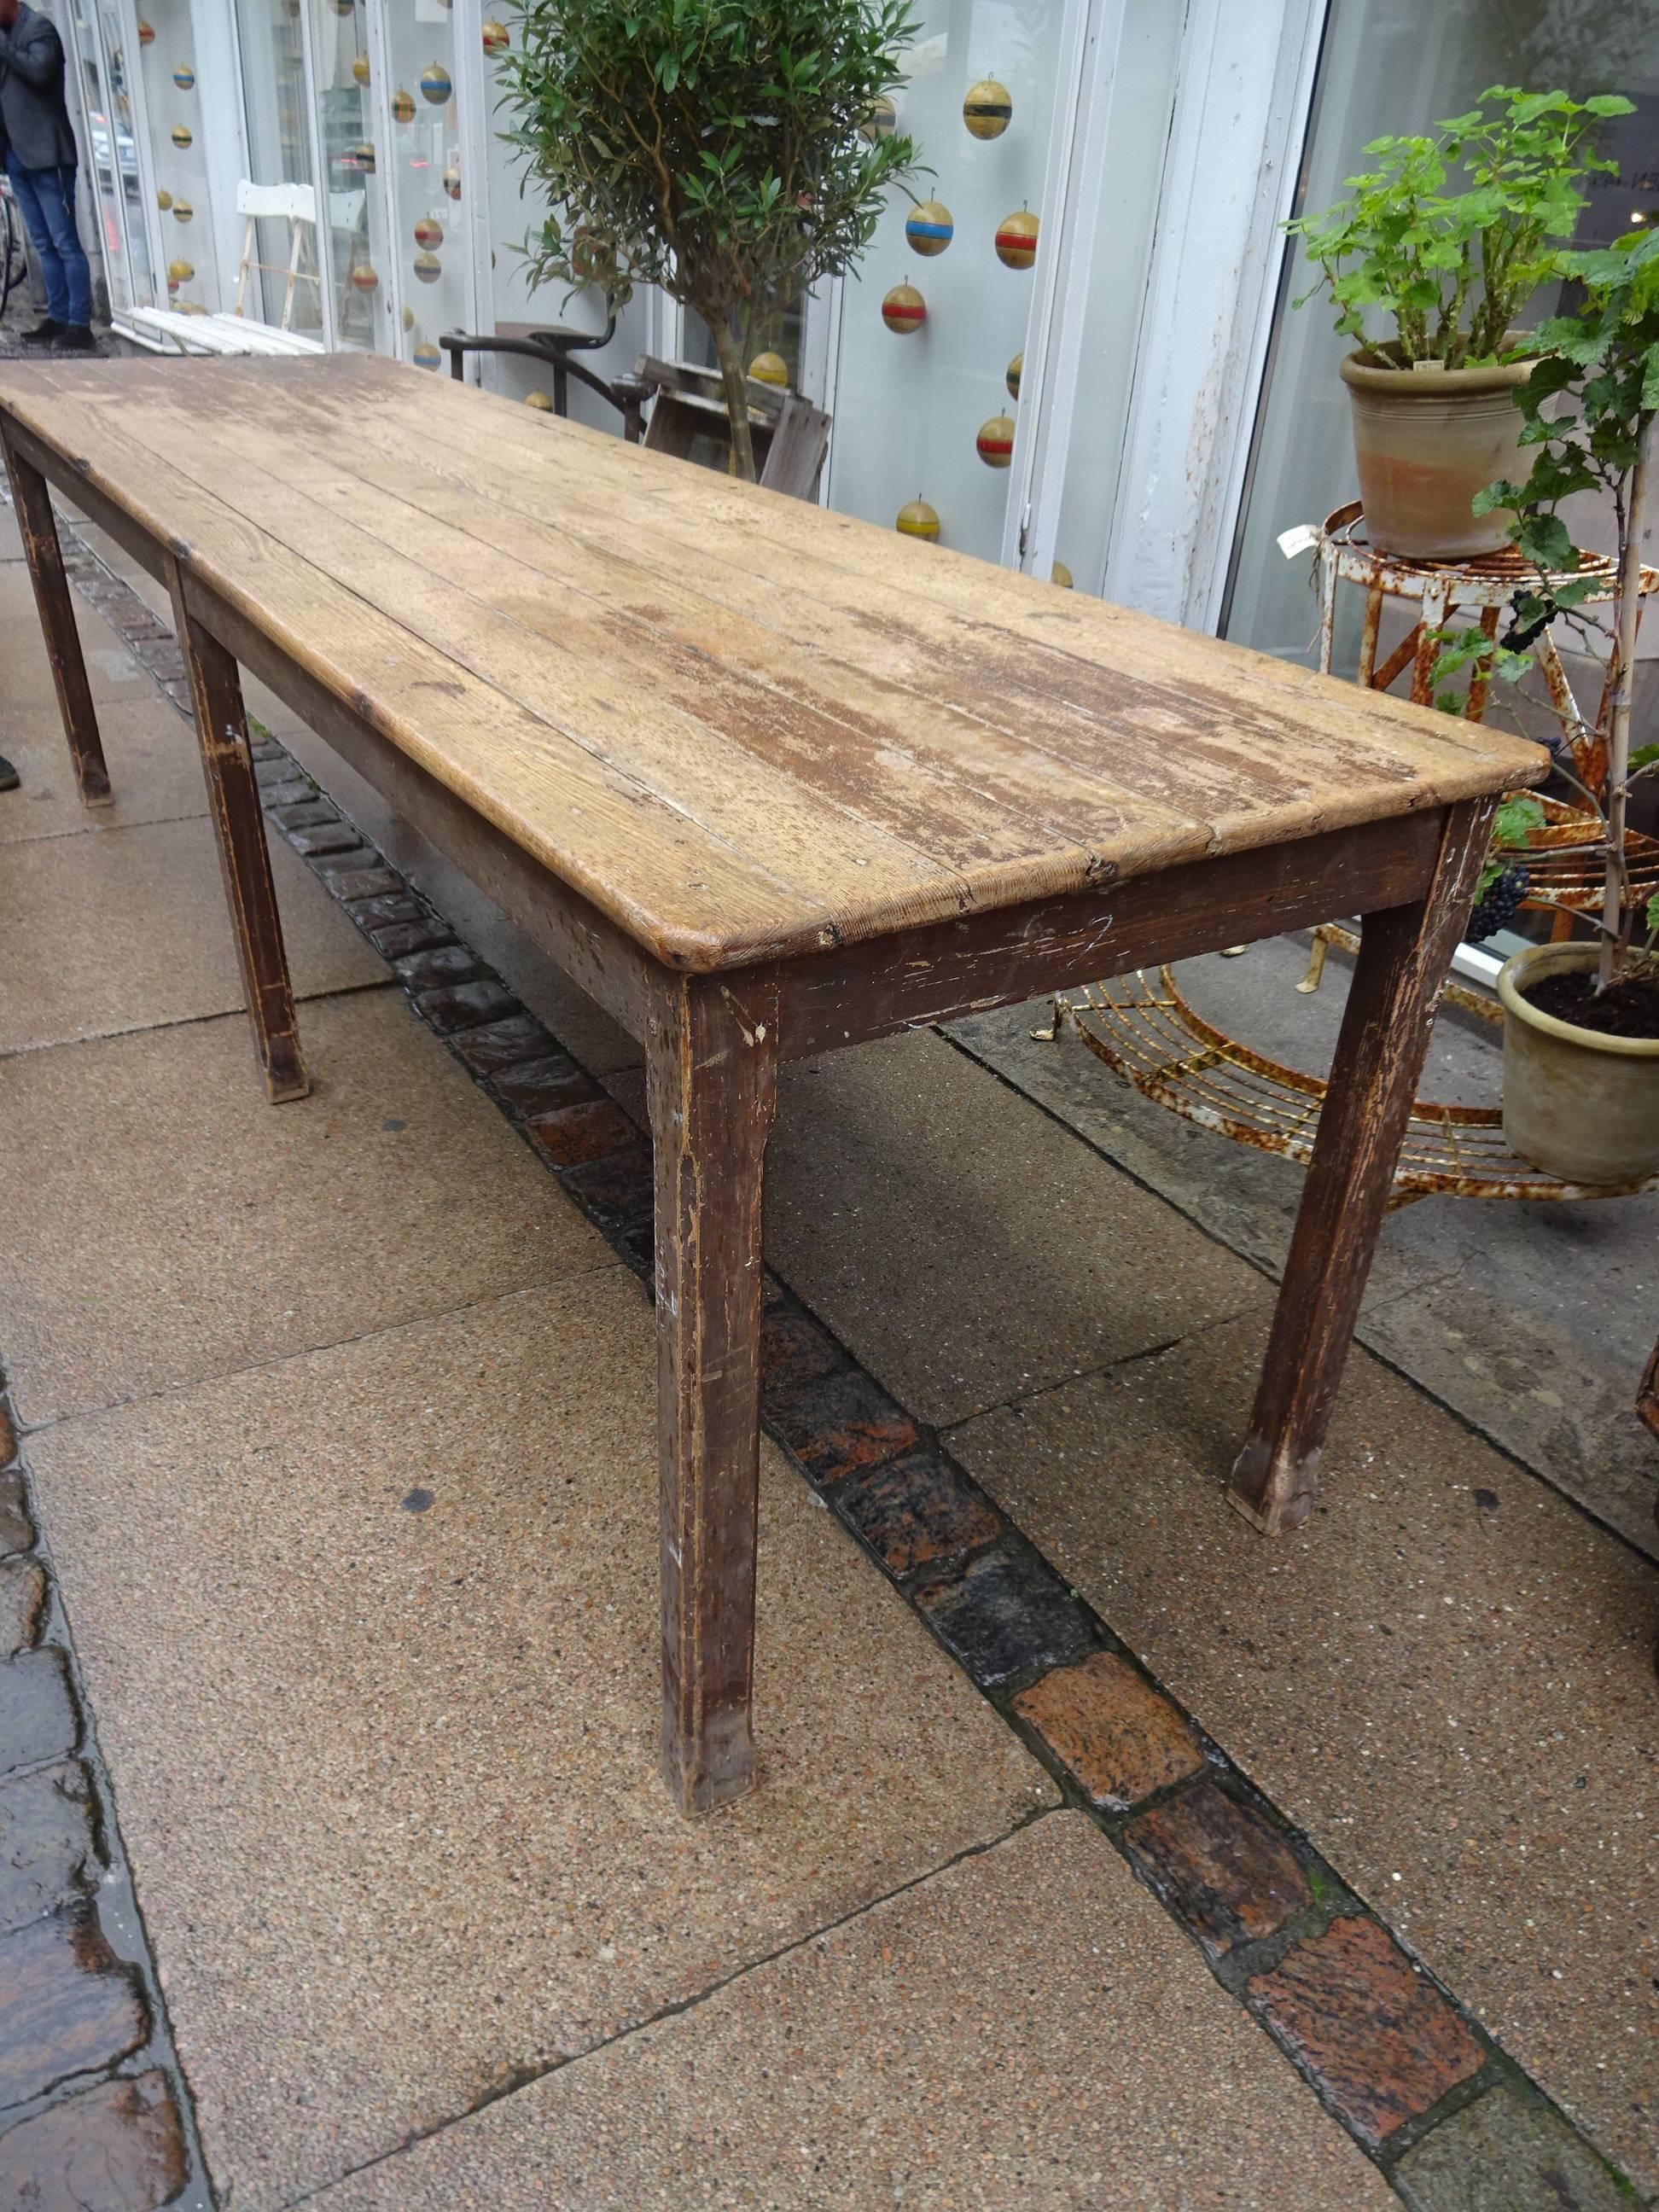 Beautiful smaller sized vintage refectory table on six legs, with genuine patina. Originates from the South of France.

Measures: H 74 x L 253 x W 69.5 cm.